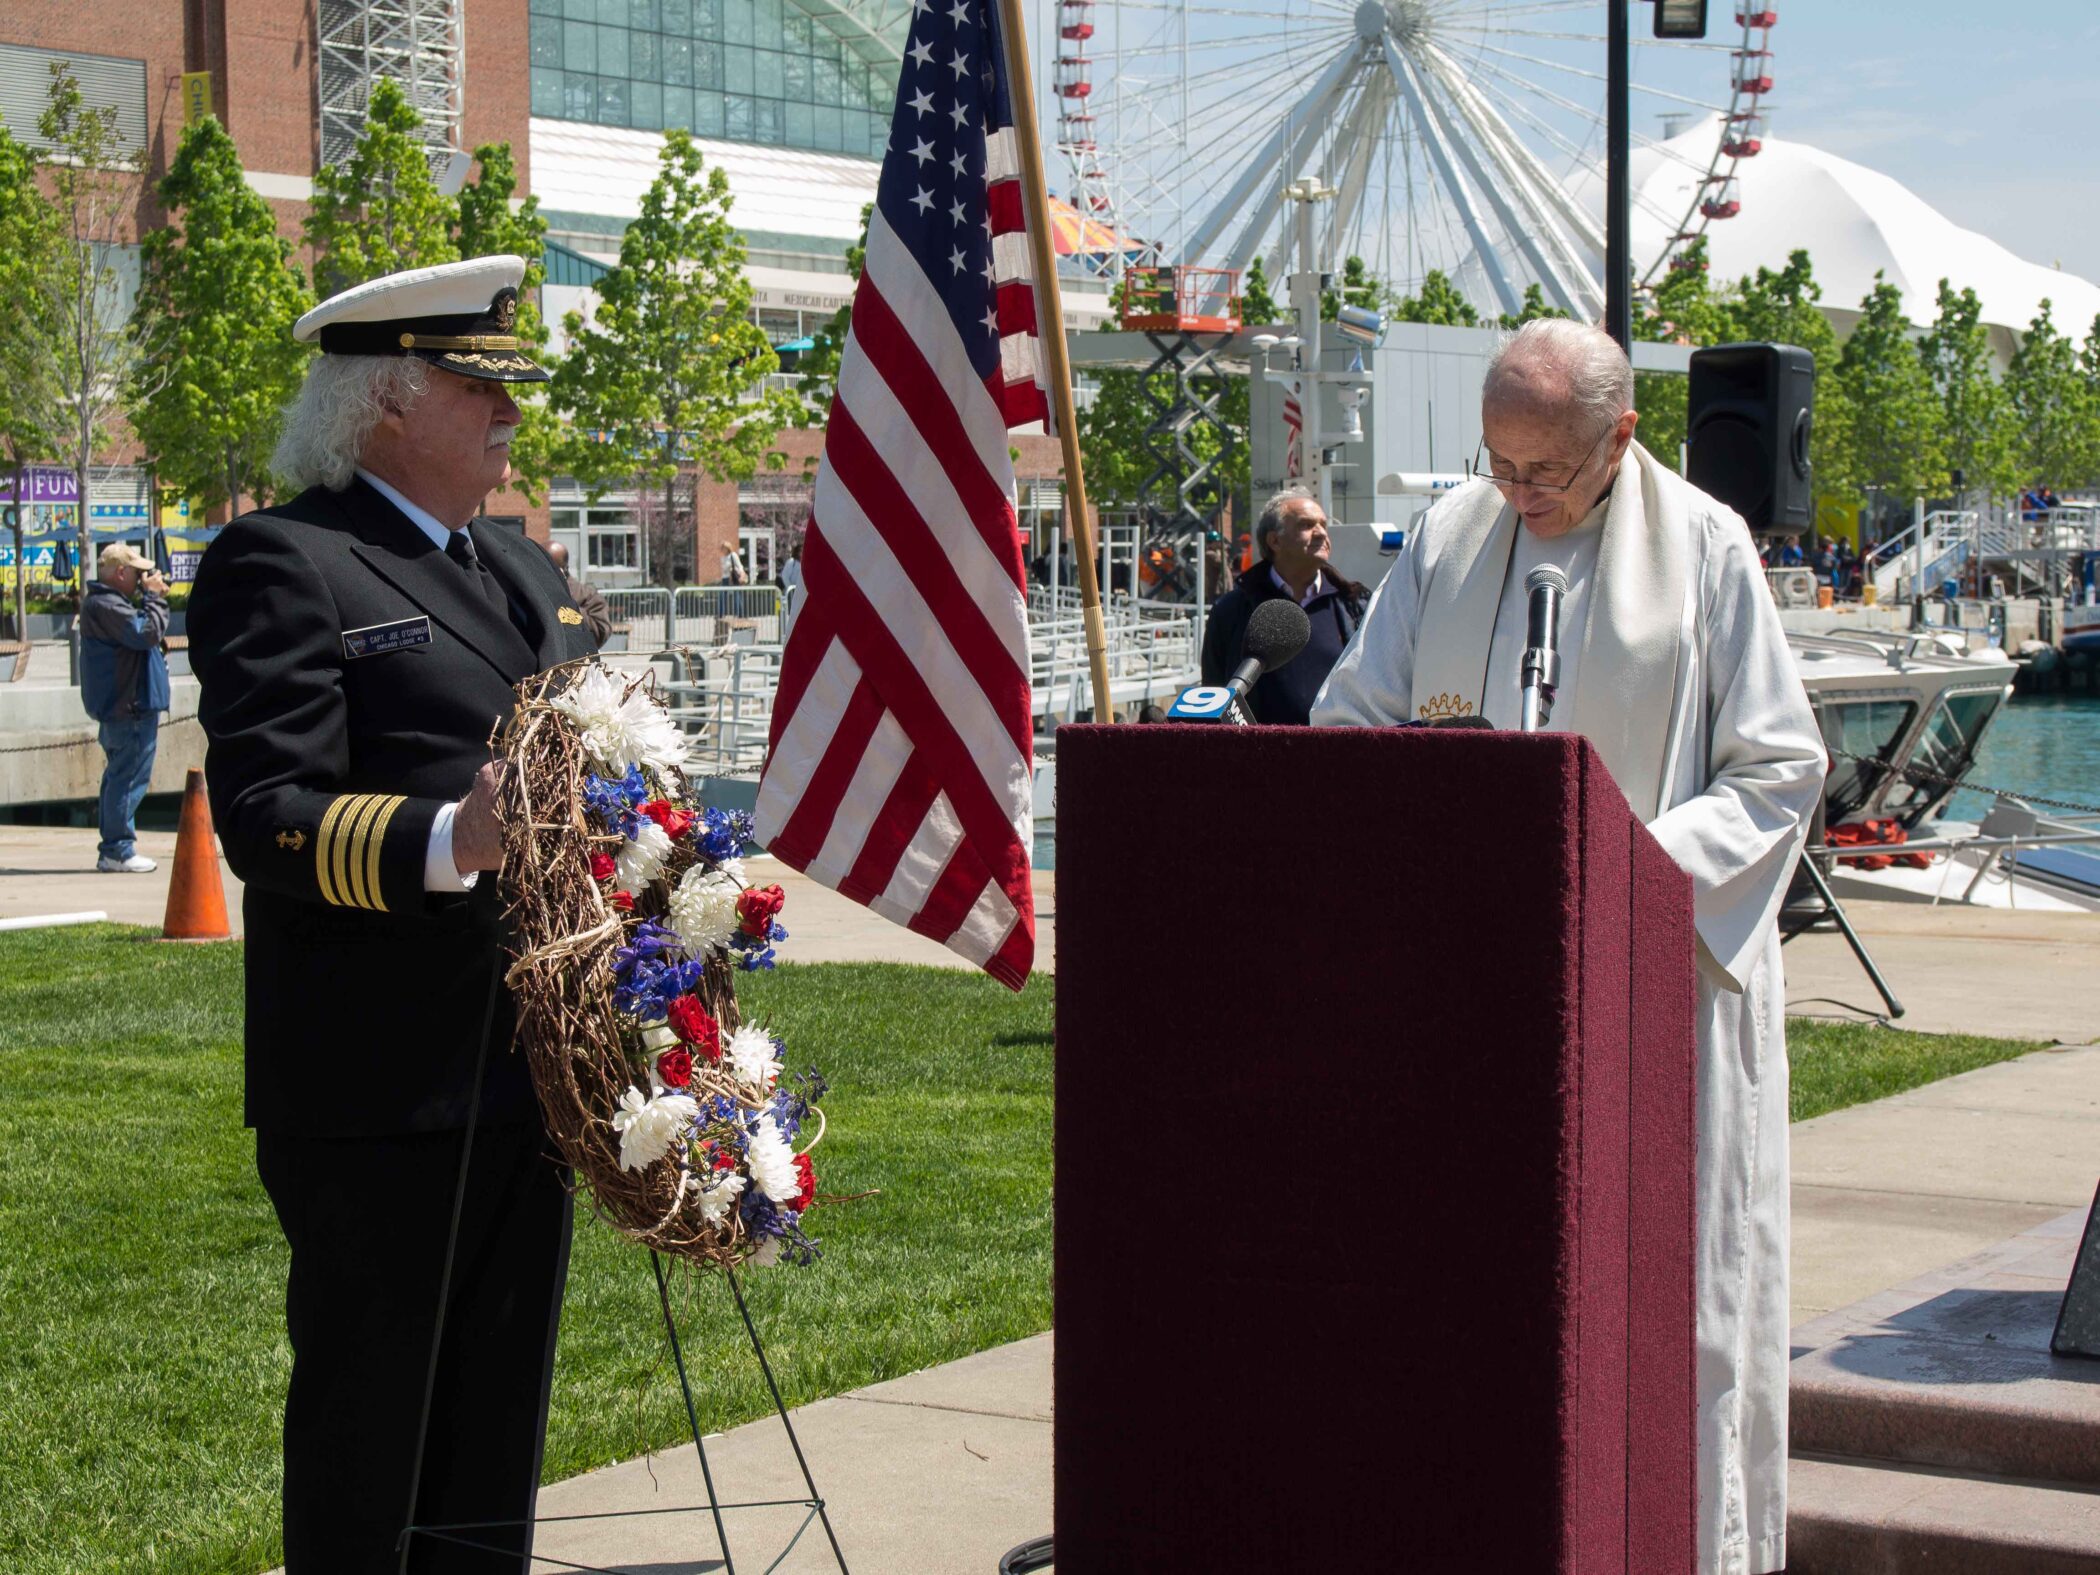 Minister and Officer at Blessing of the Fleet at Navy Pier